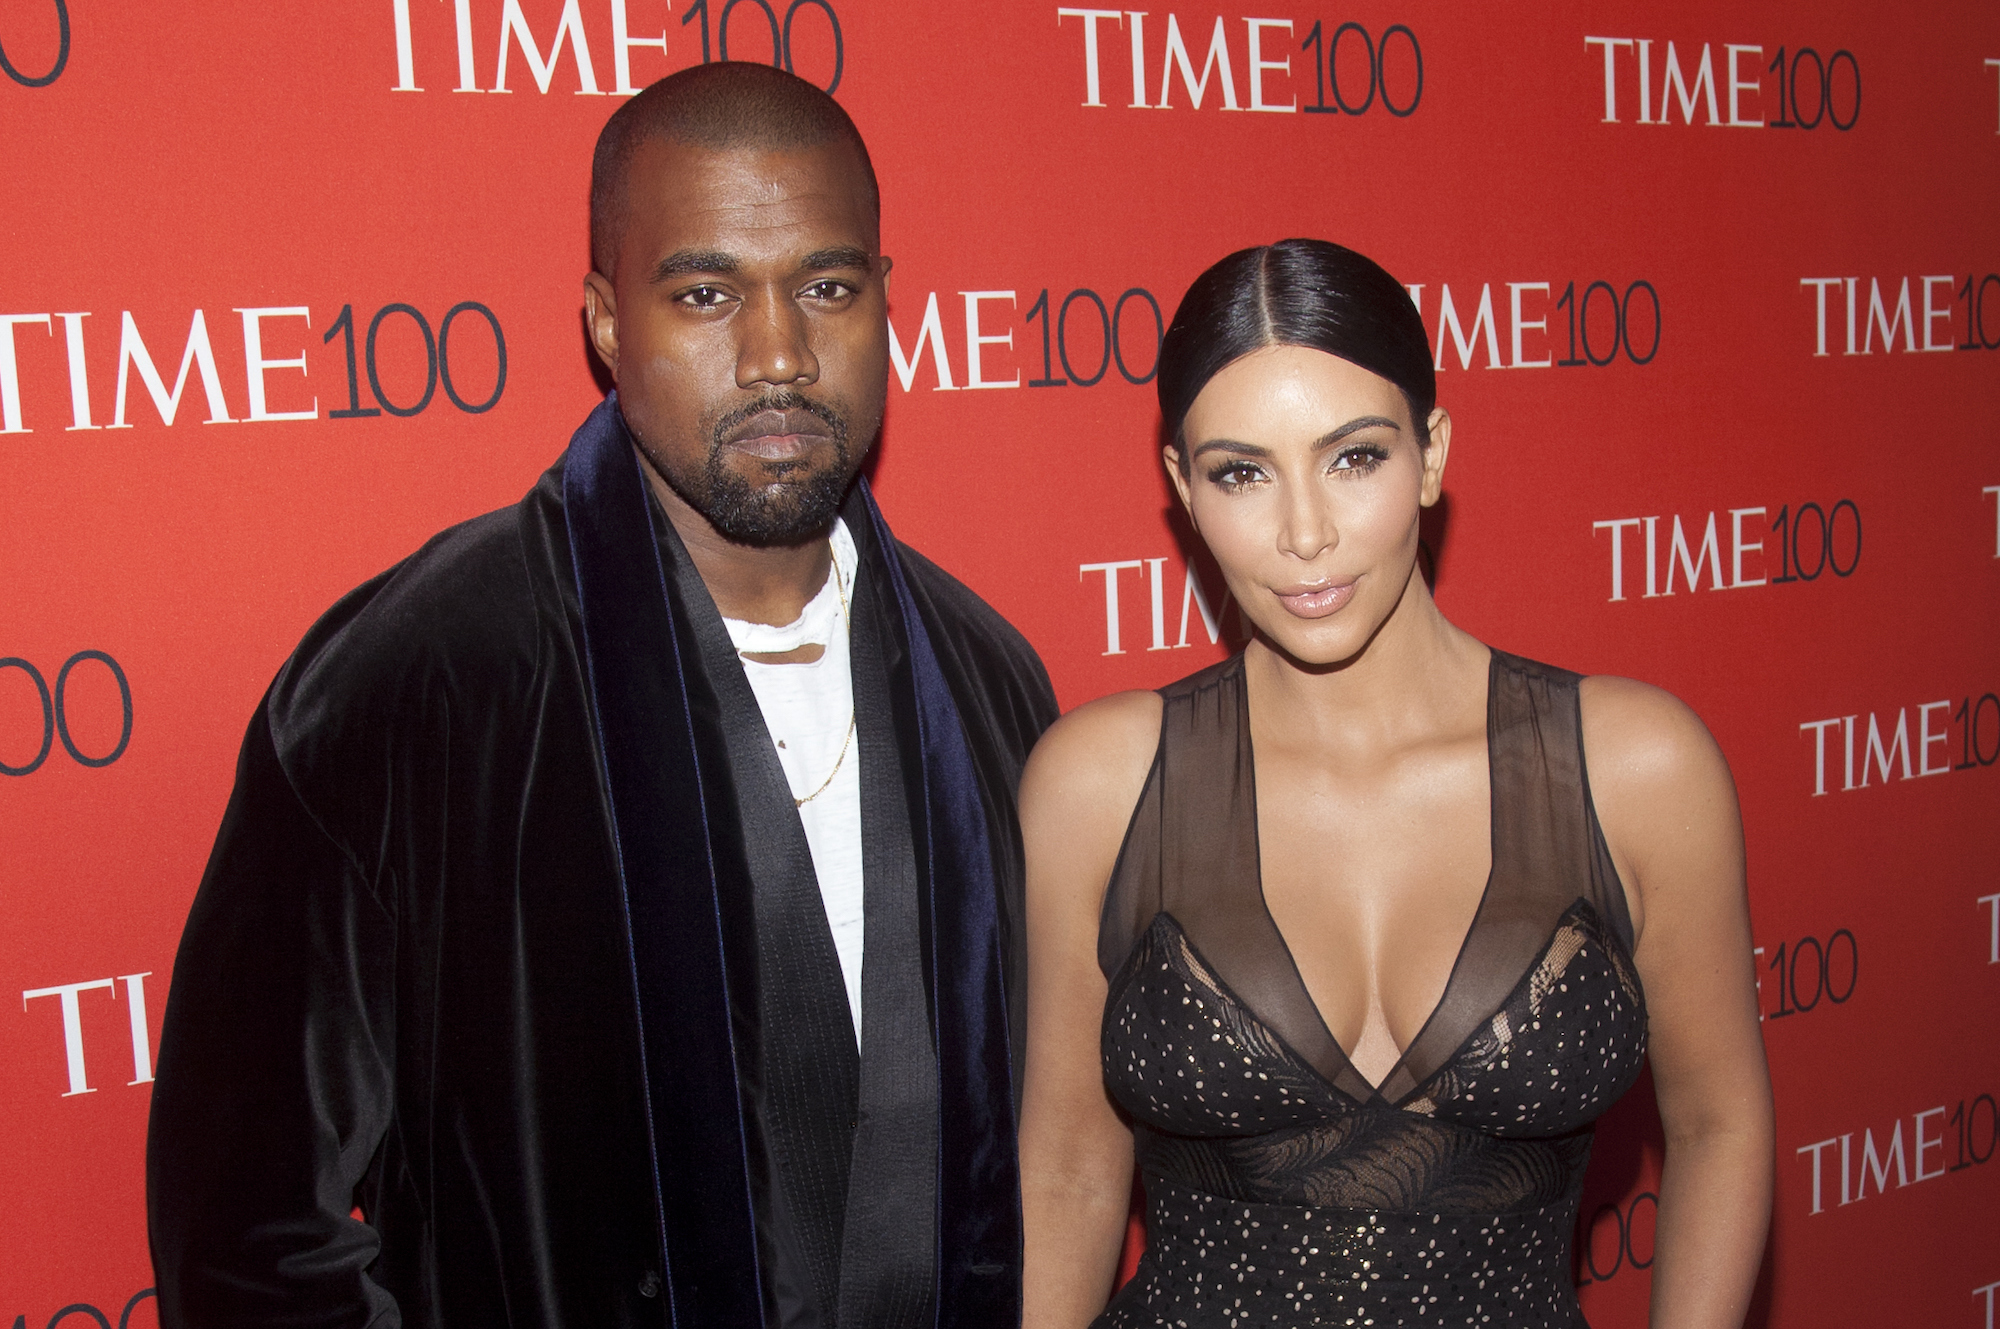 Kanye West and Kim Kardashian West attending "TIME 100 Gala, TIME's 100 Most Influential People In The World